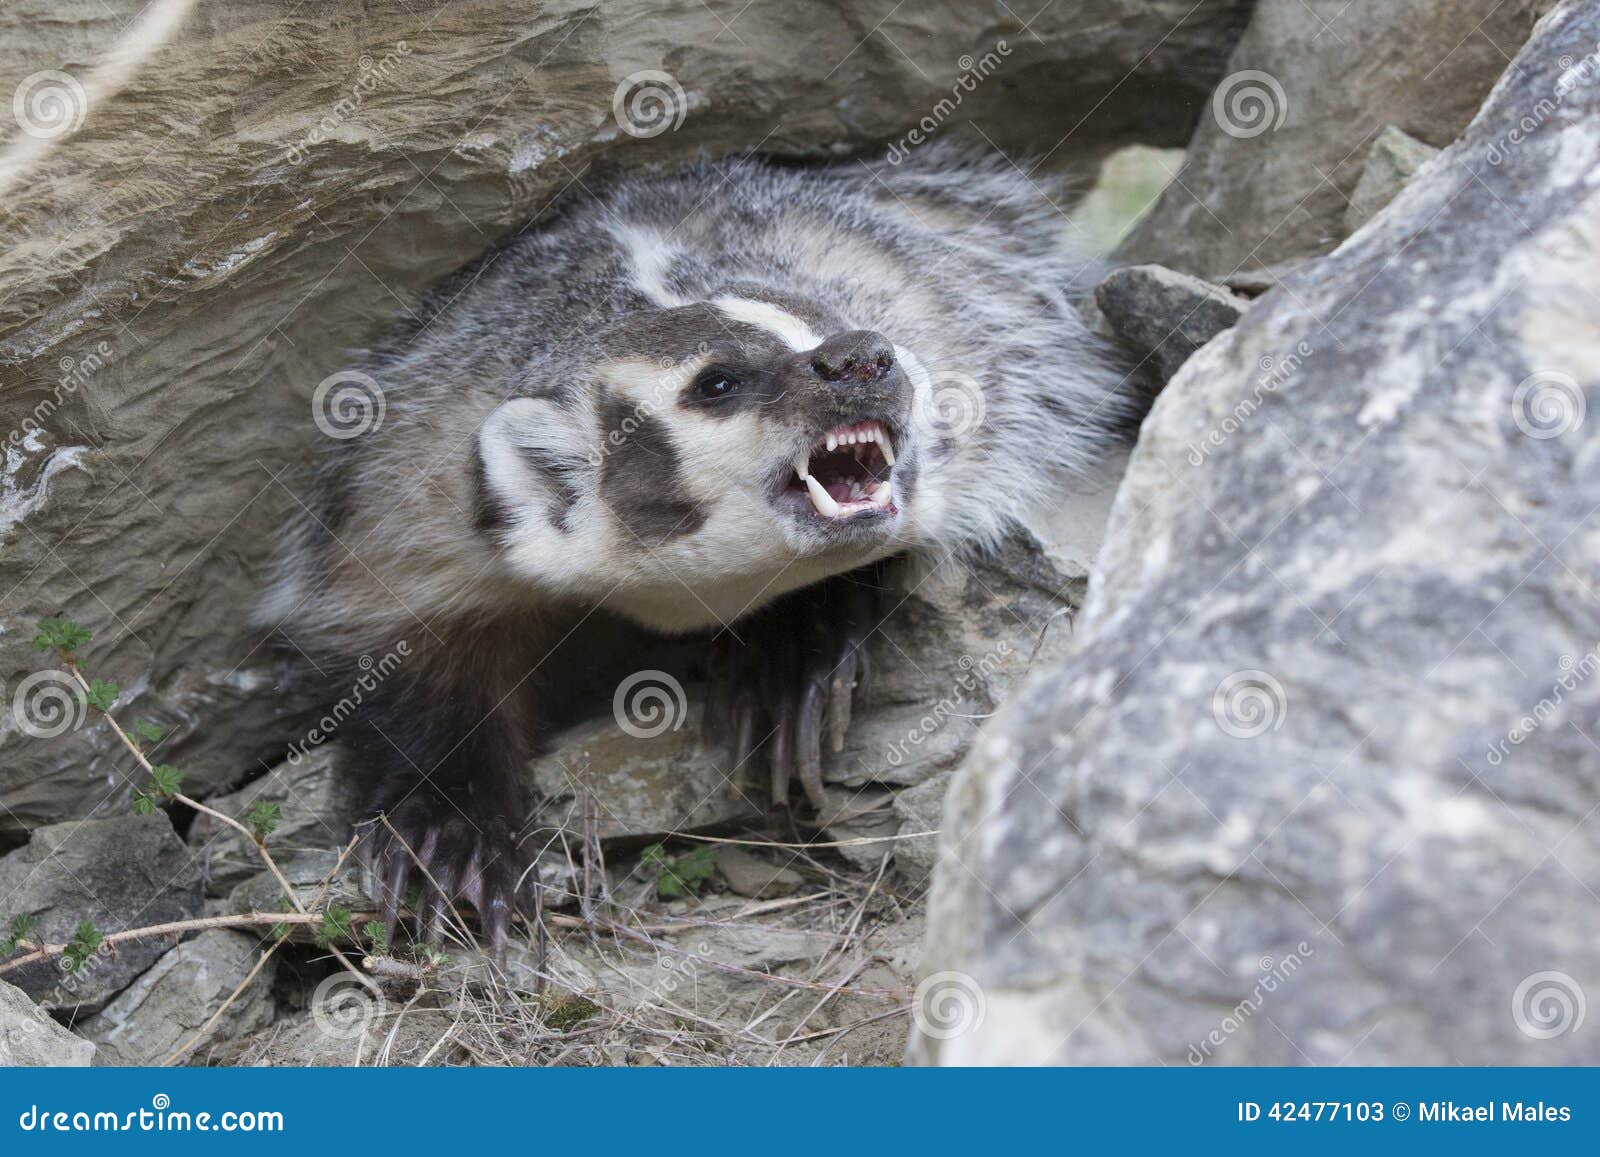 the fight is on with american badger